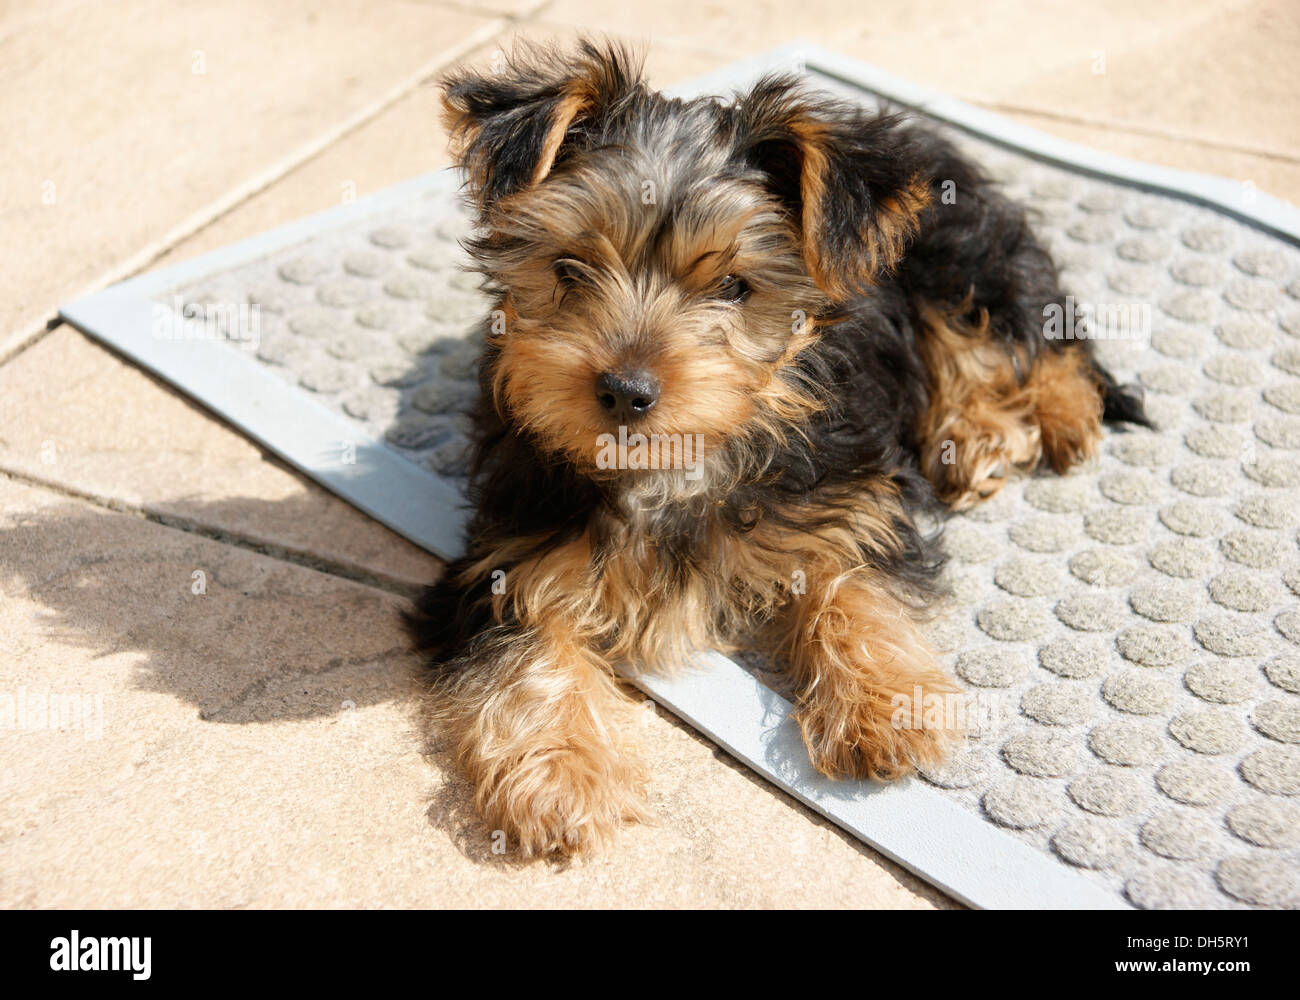 Cute Yorkshire terrier puppy dog Stock Photo